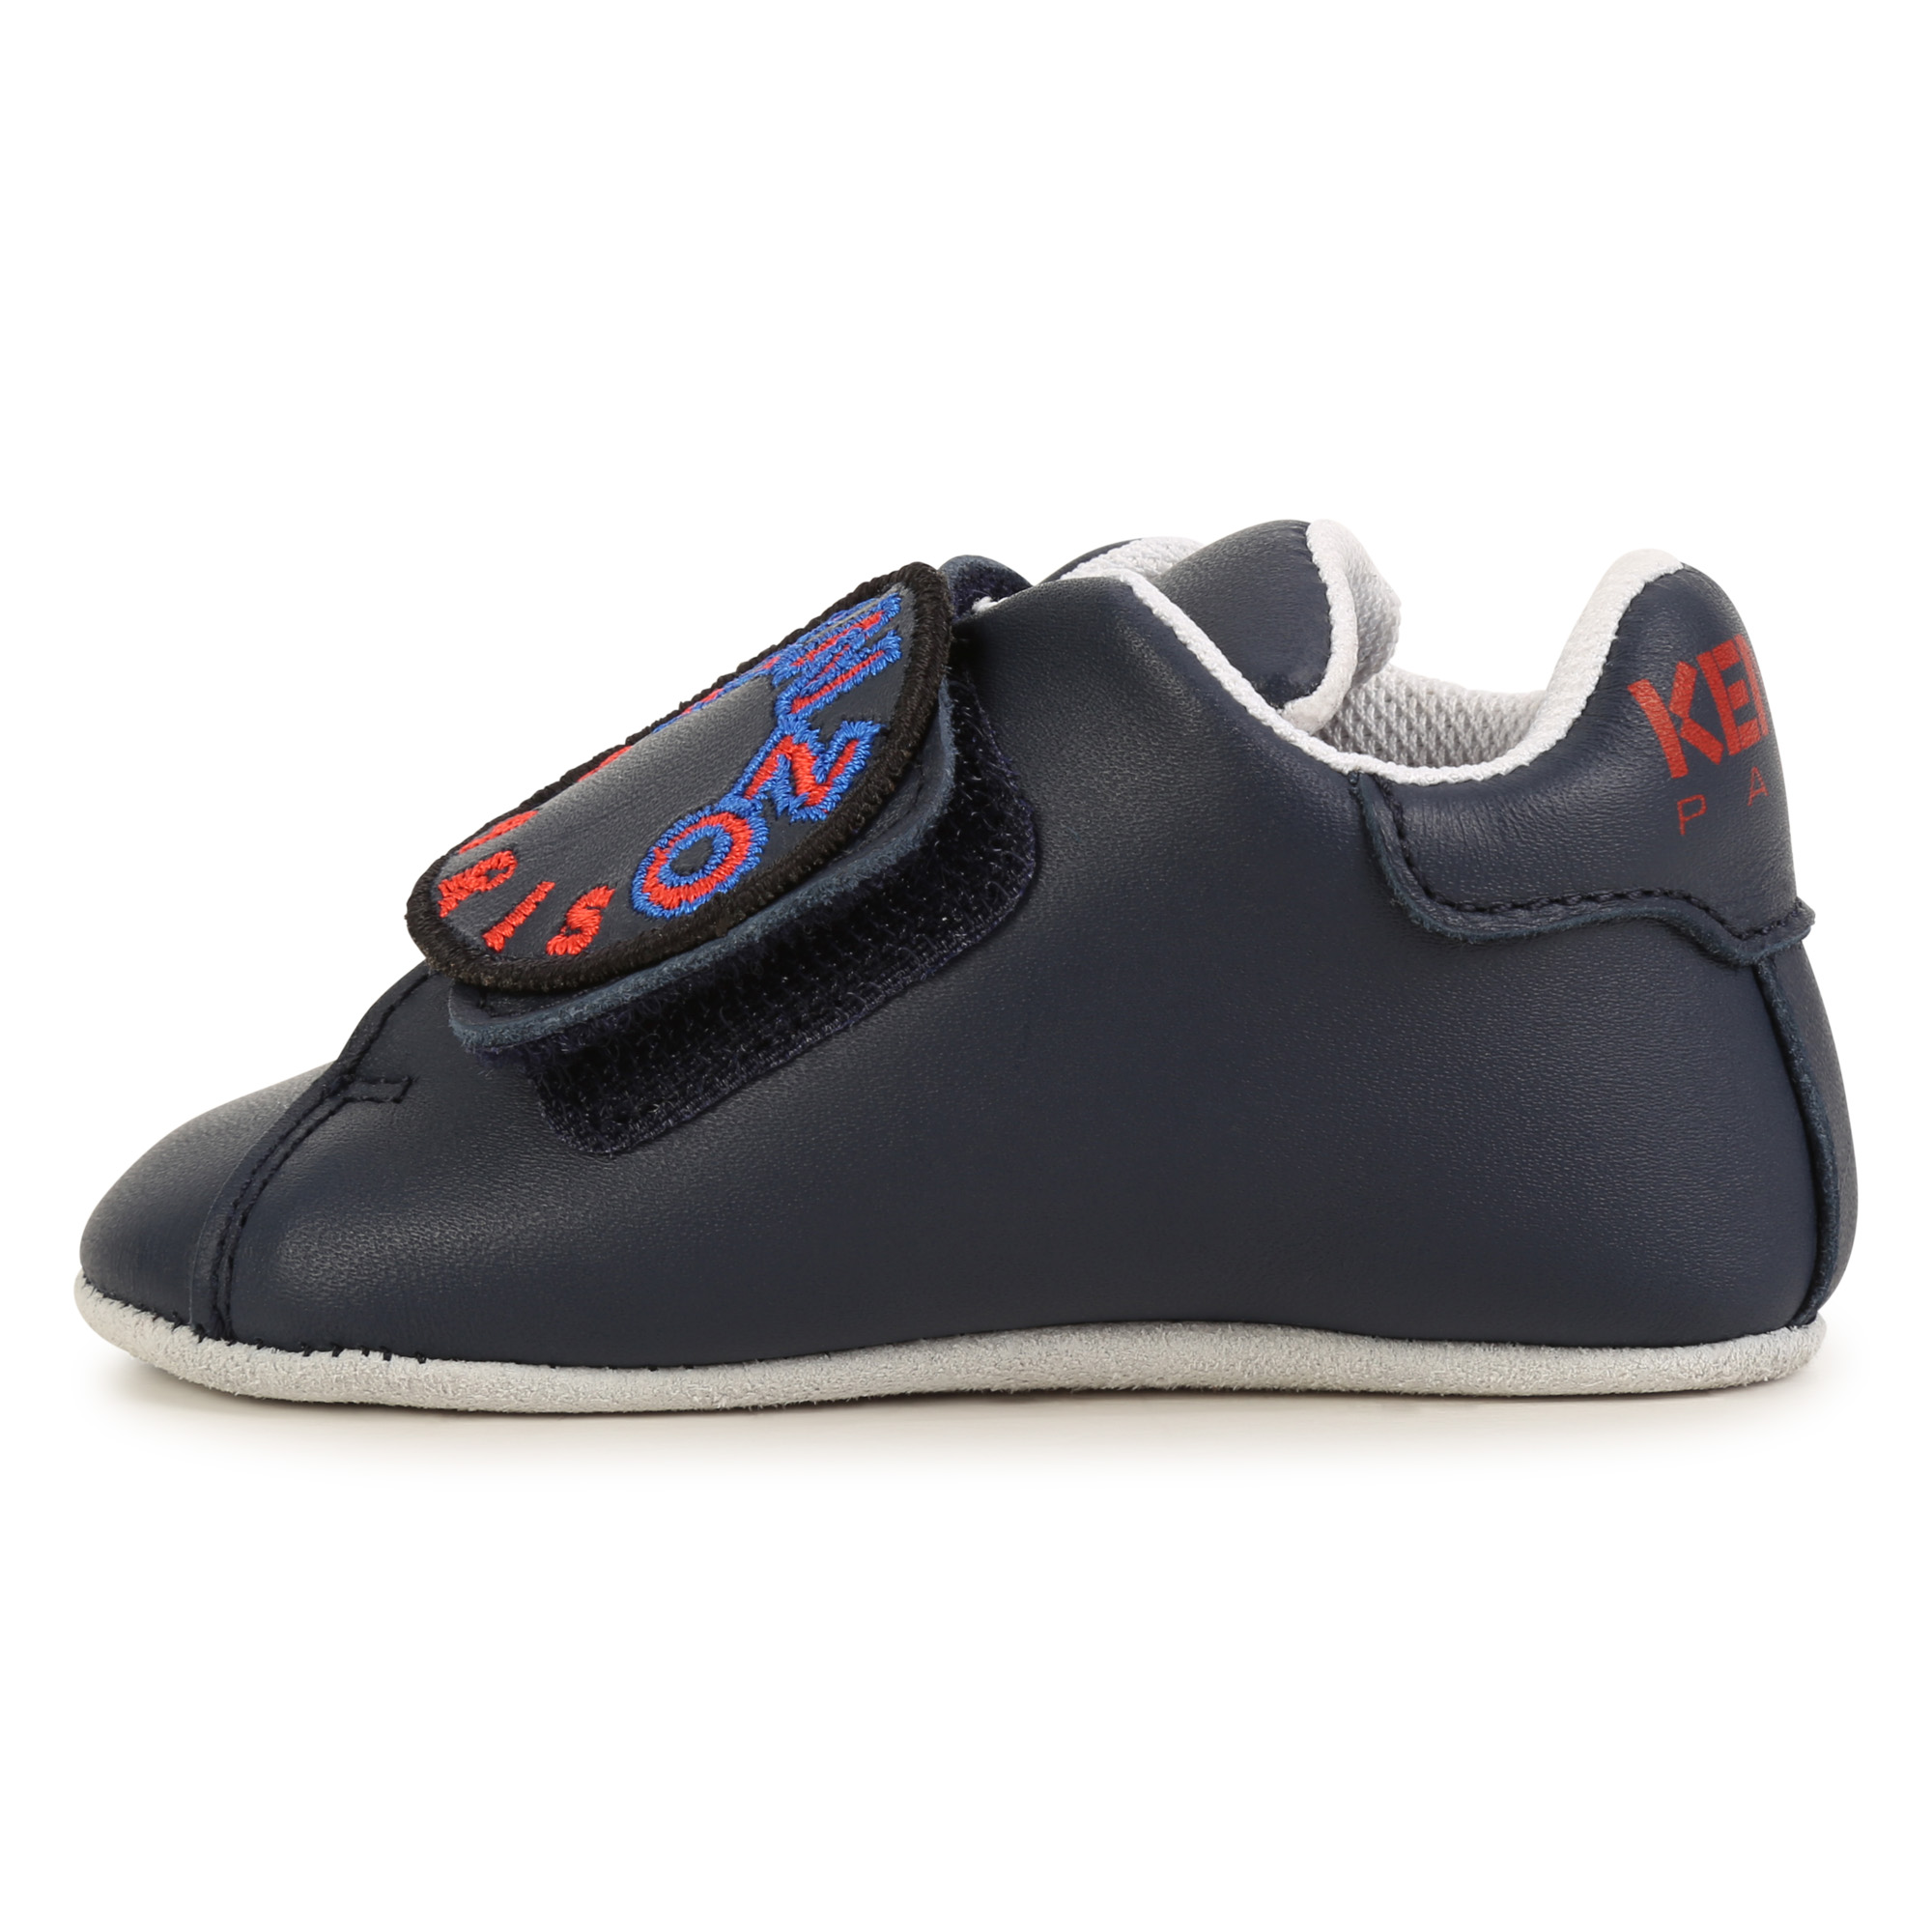 Leather booties KENZO KIDS for UNISEX